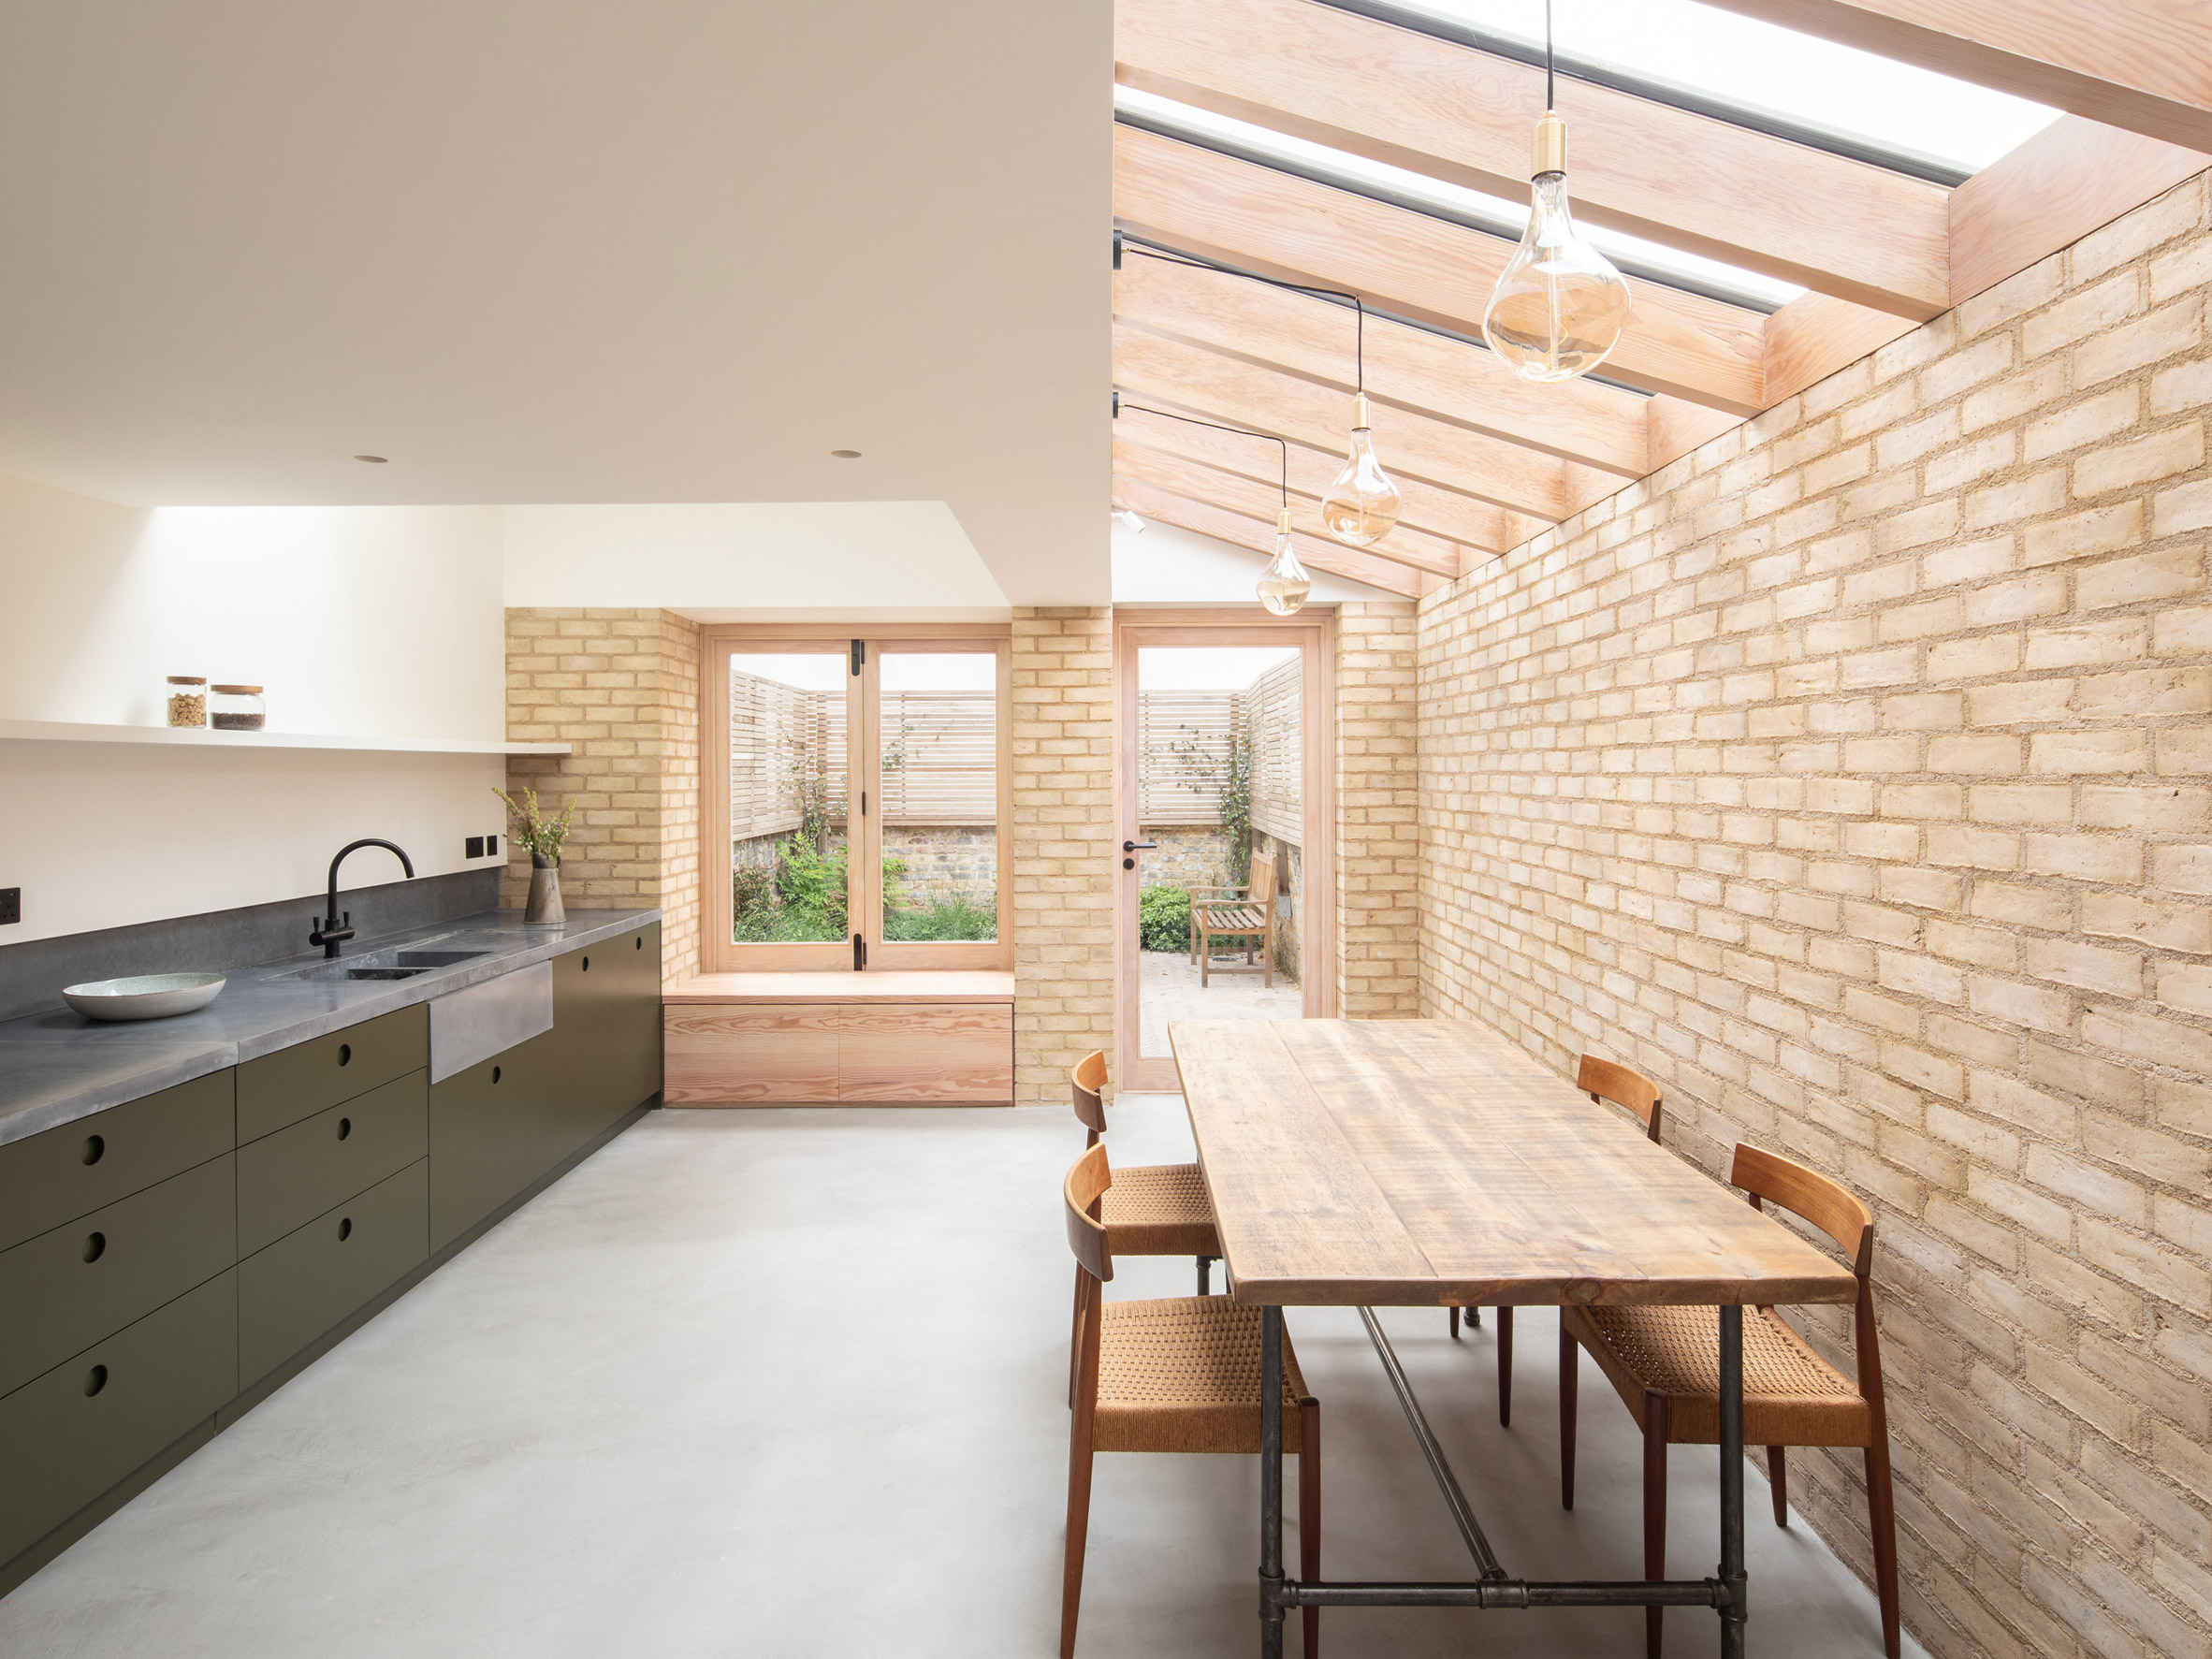 Vestry Road house extension by Oliver Leech Architects new kitchen